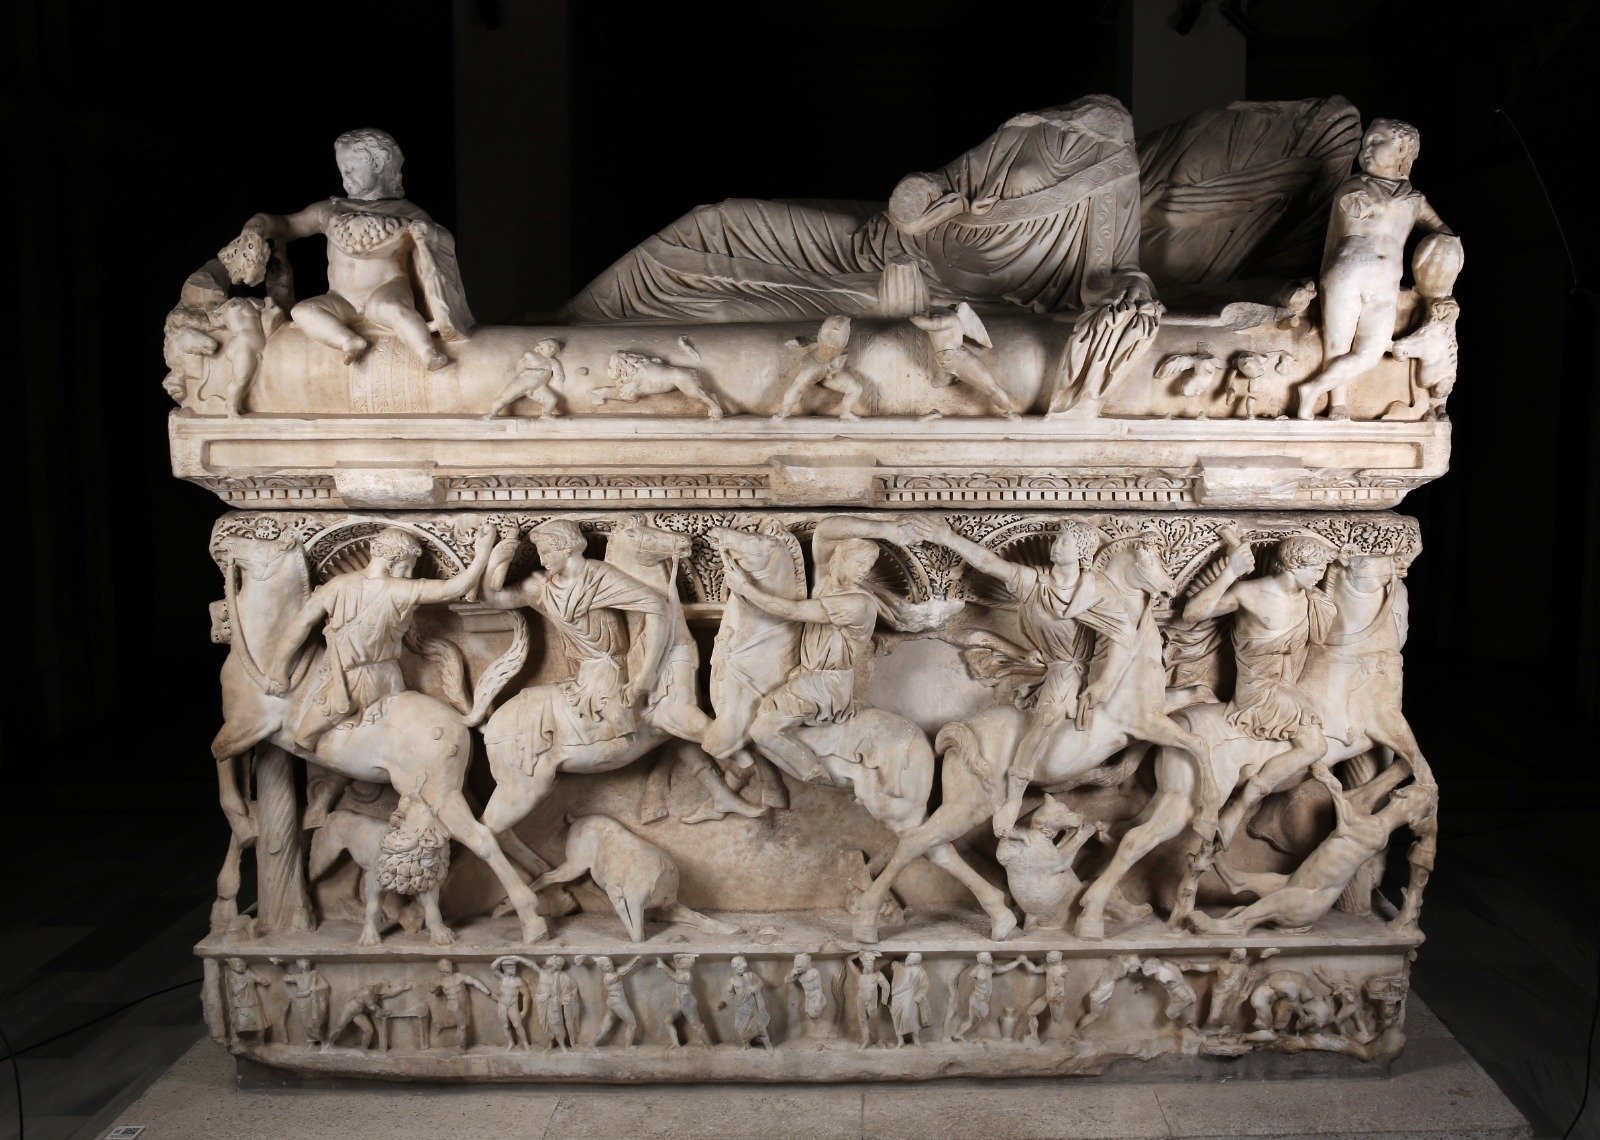 A view from the Sidamara Sarcophagus.(Courtesy of the Ministry of Culture and Tourism)